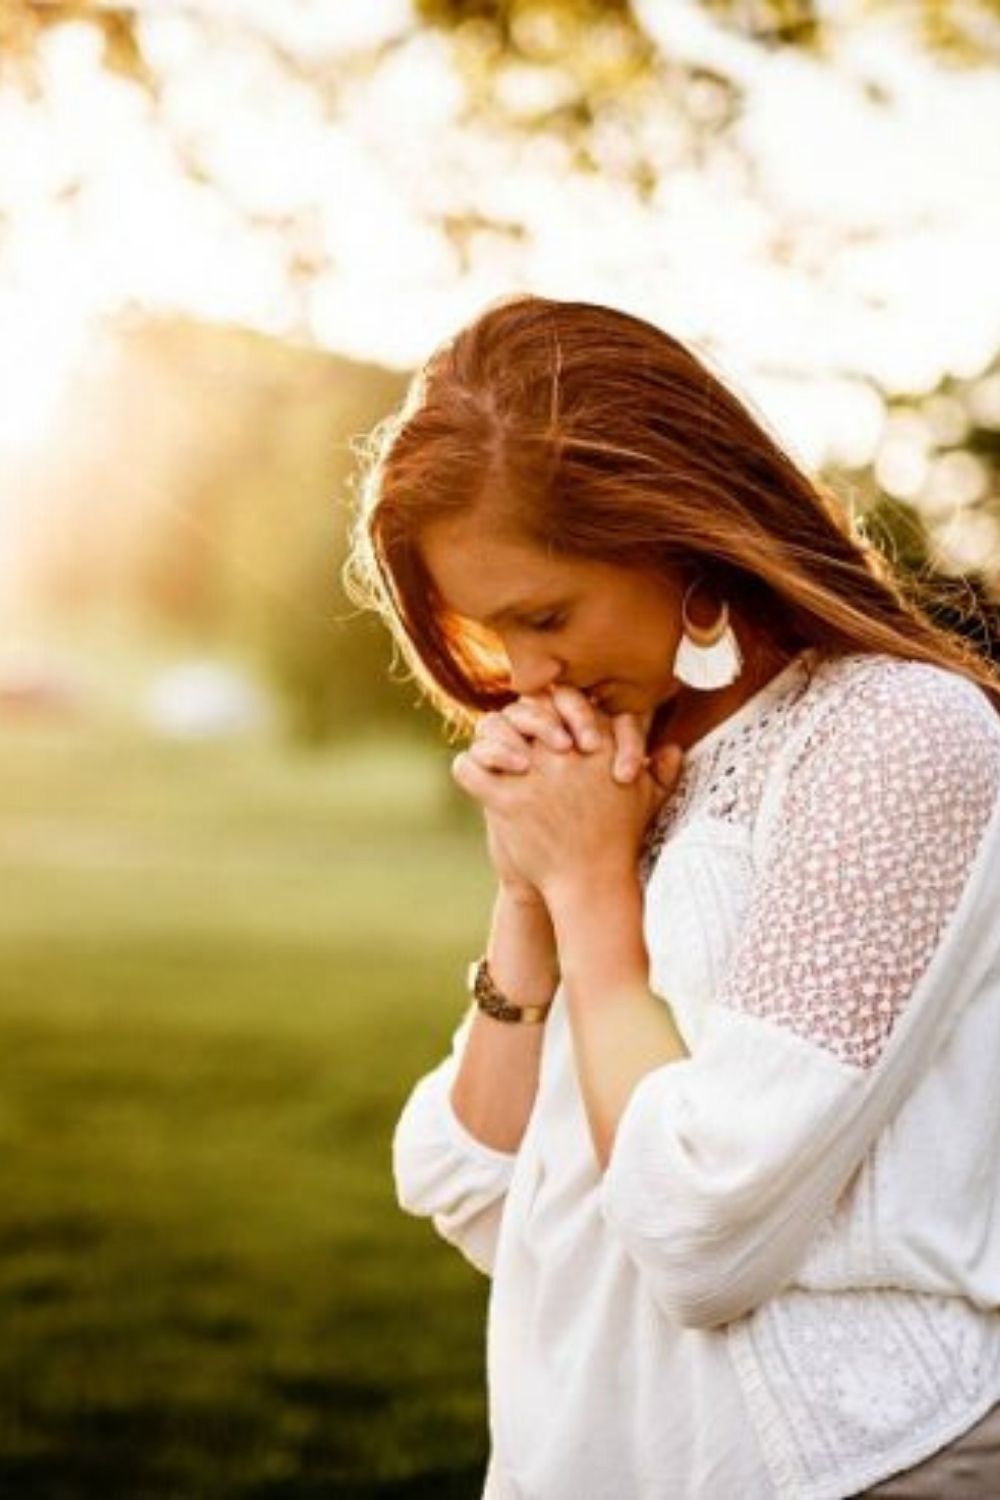 Do You Pray for Your Husband? Take the 31-Day Challenge